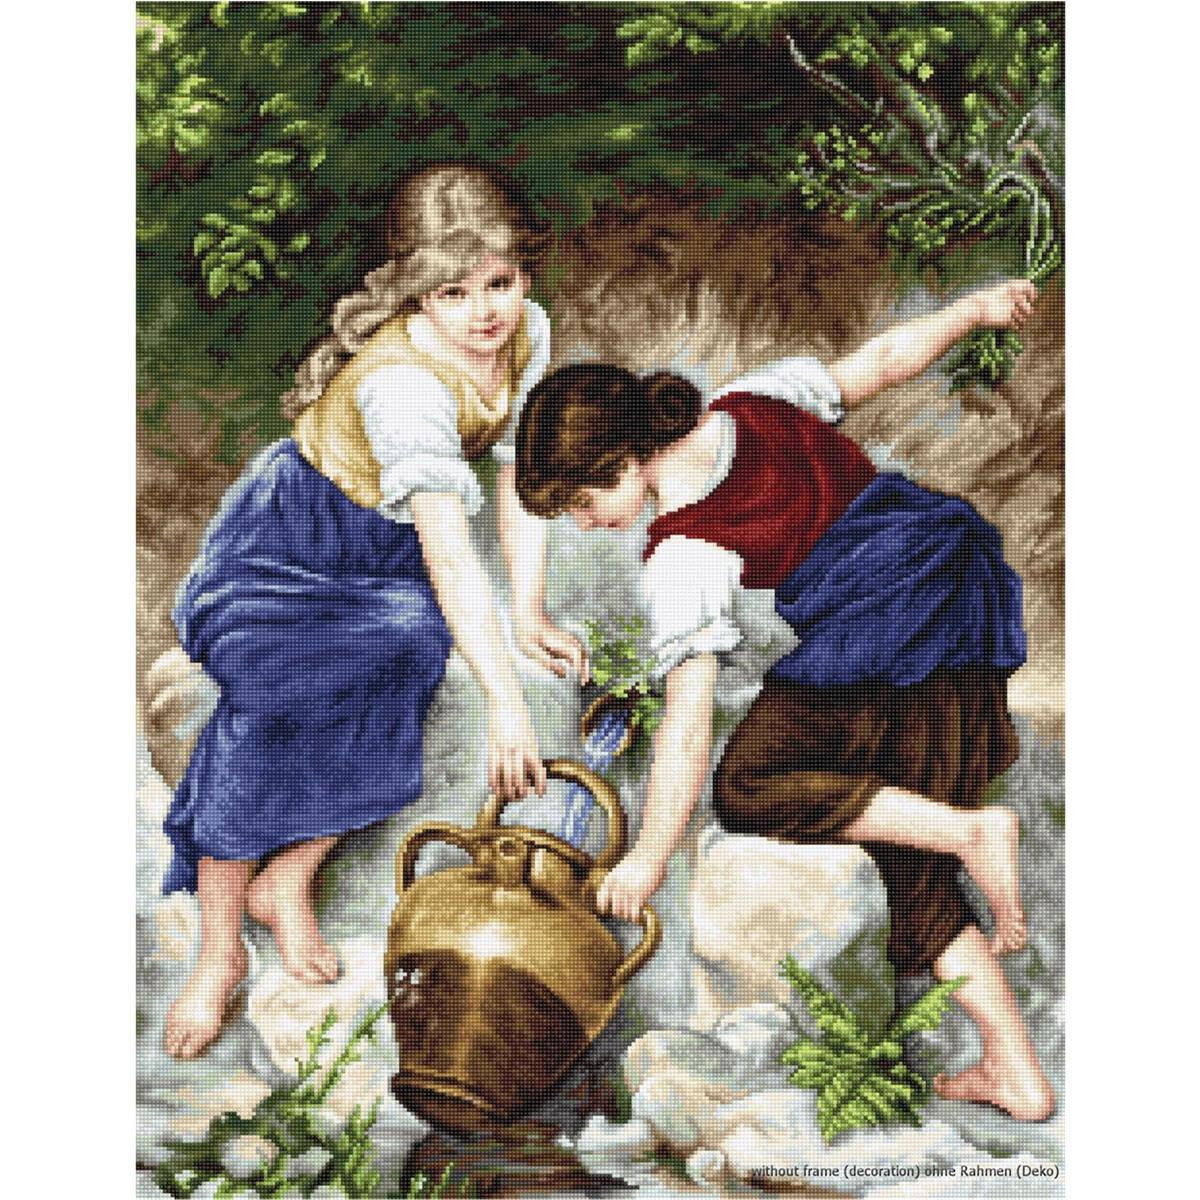 One painting shows two young girls fetching water from a...